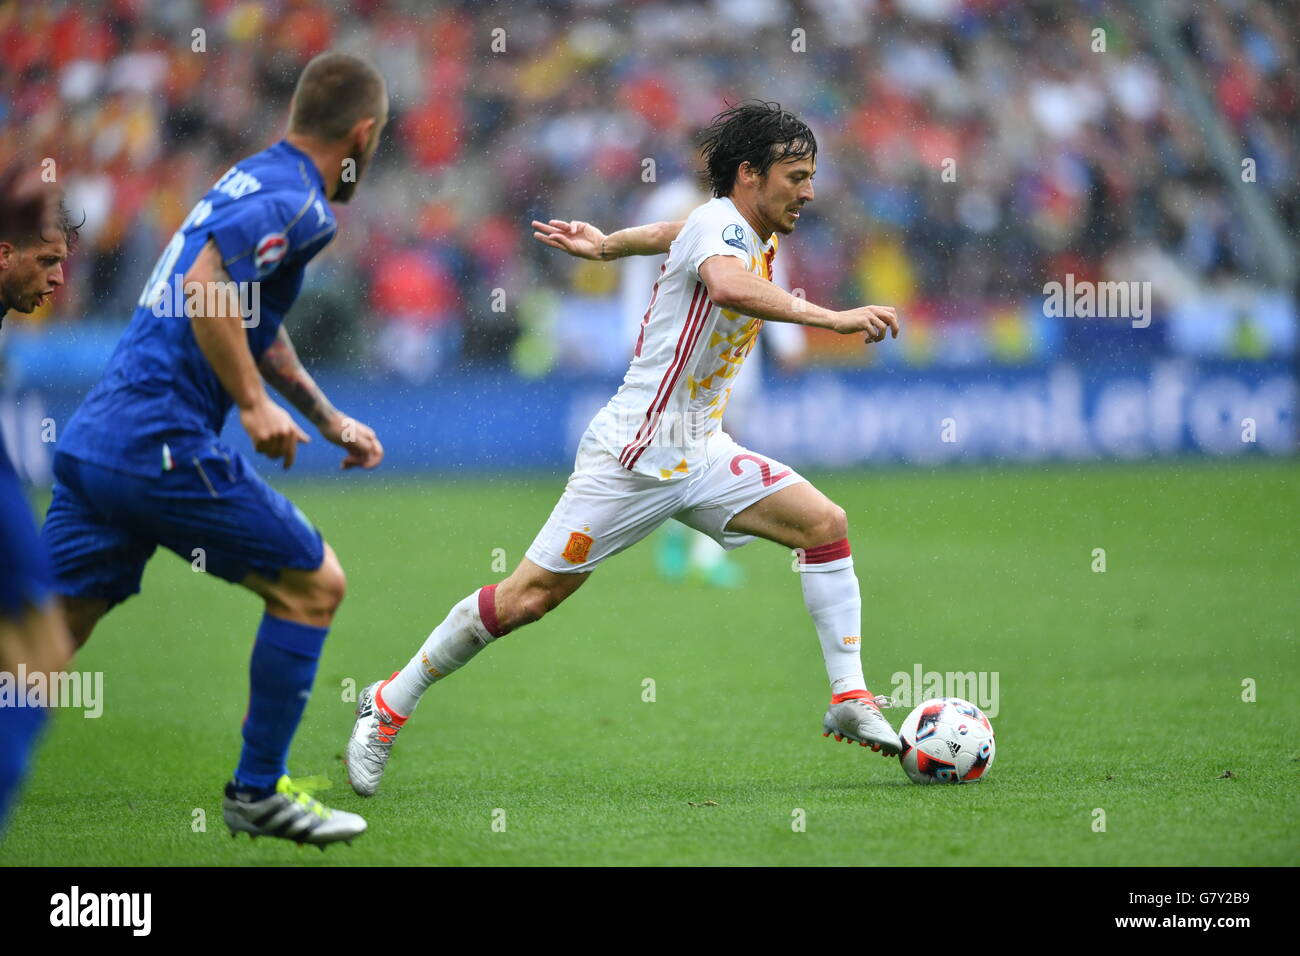 Paris, France. 27th June, 2016. David Silva(R) of Spain competes during the Euro 2016 round of 16 football match between Spain and Italy in Paris, France, June 27, 2016. © Tao Xiyi/Xinhua/Alamy Live News Stock Photo